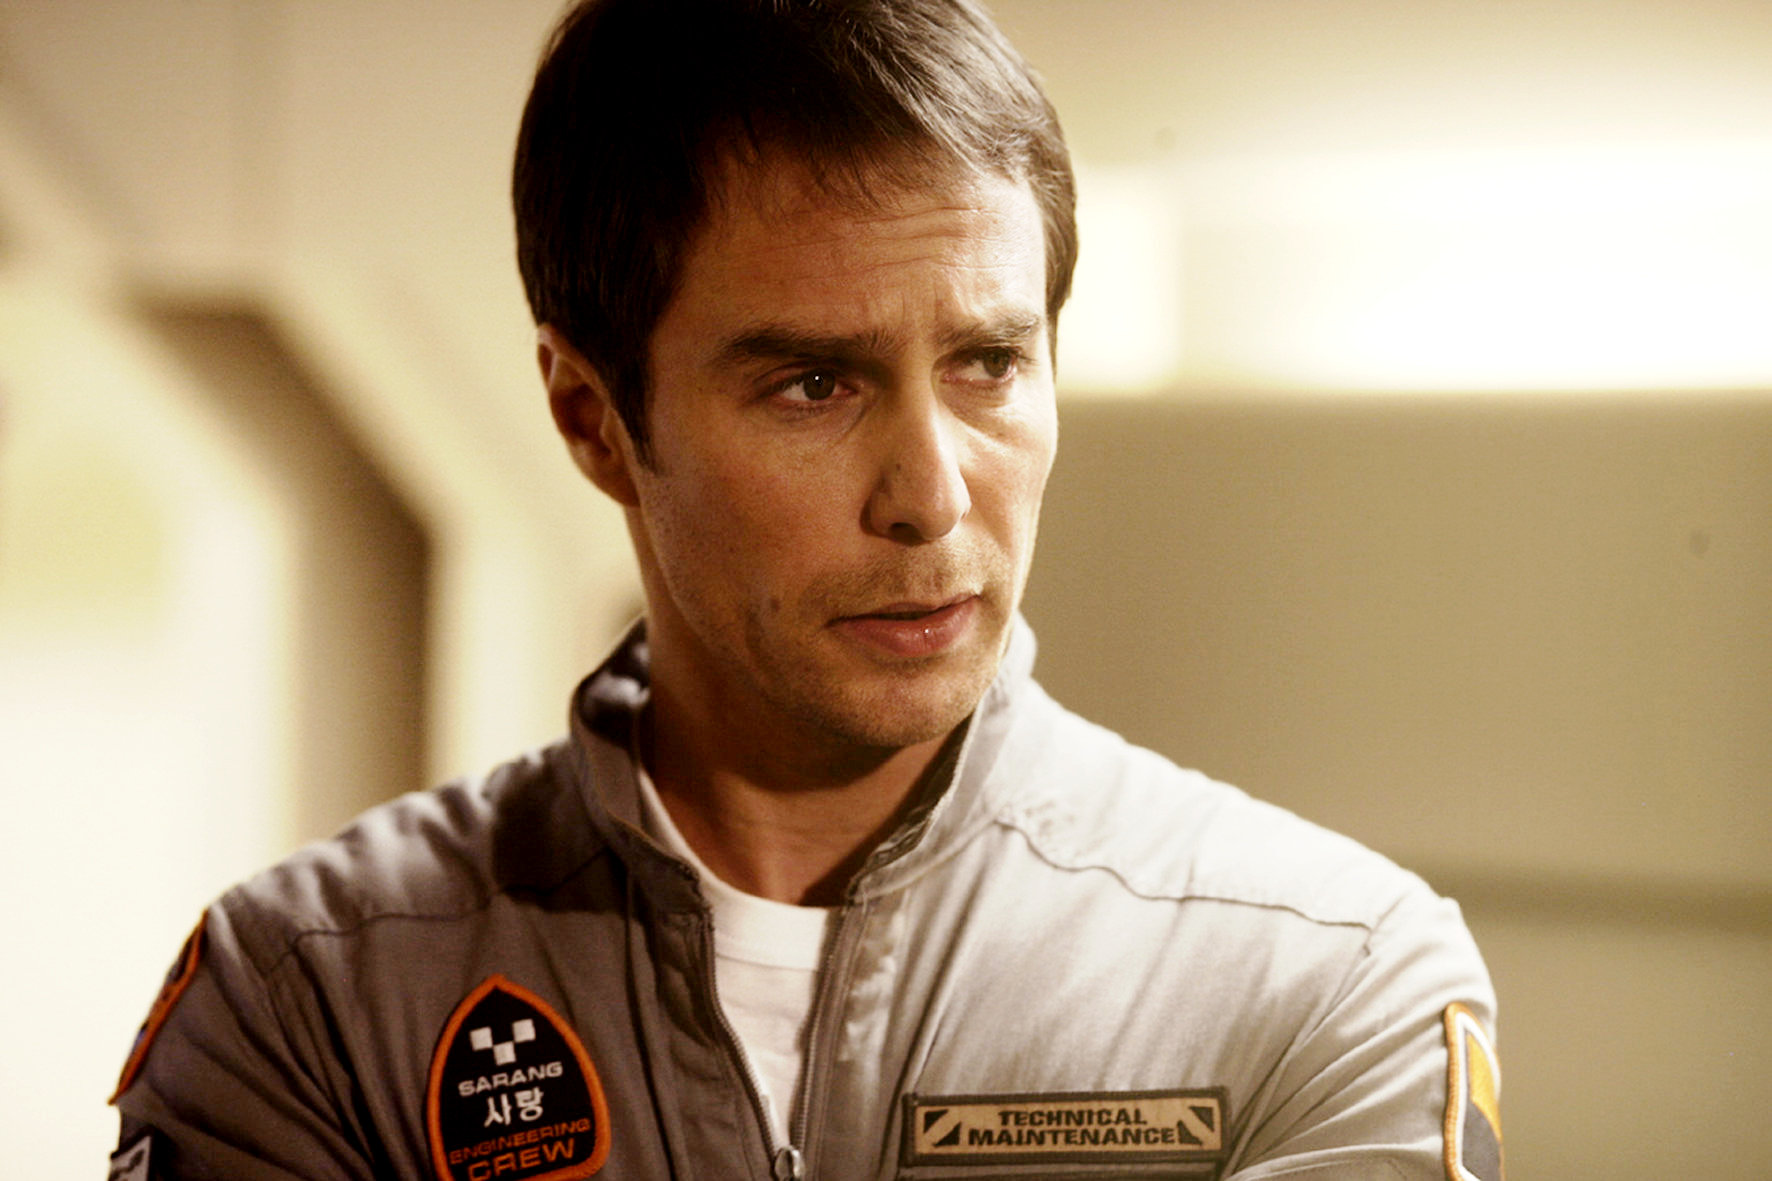 Sam Rockwell Backgrounds, Compatible - PC, Mobile, Gadgets| 1772x1181 px